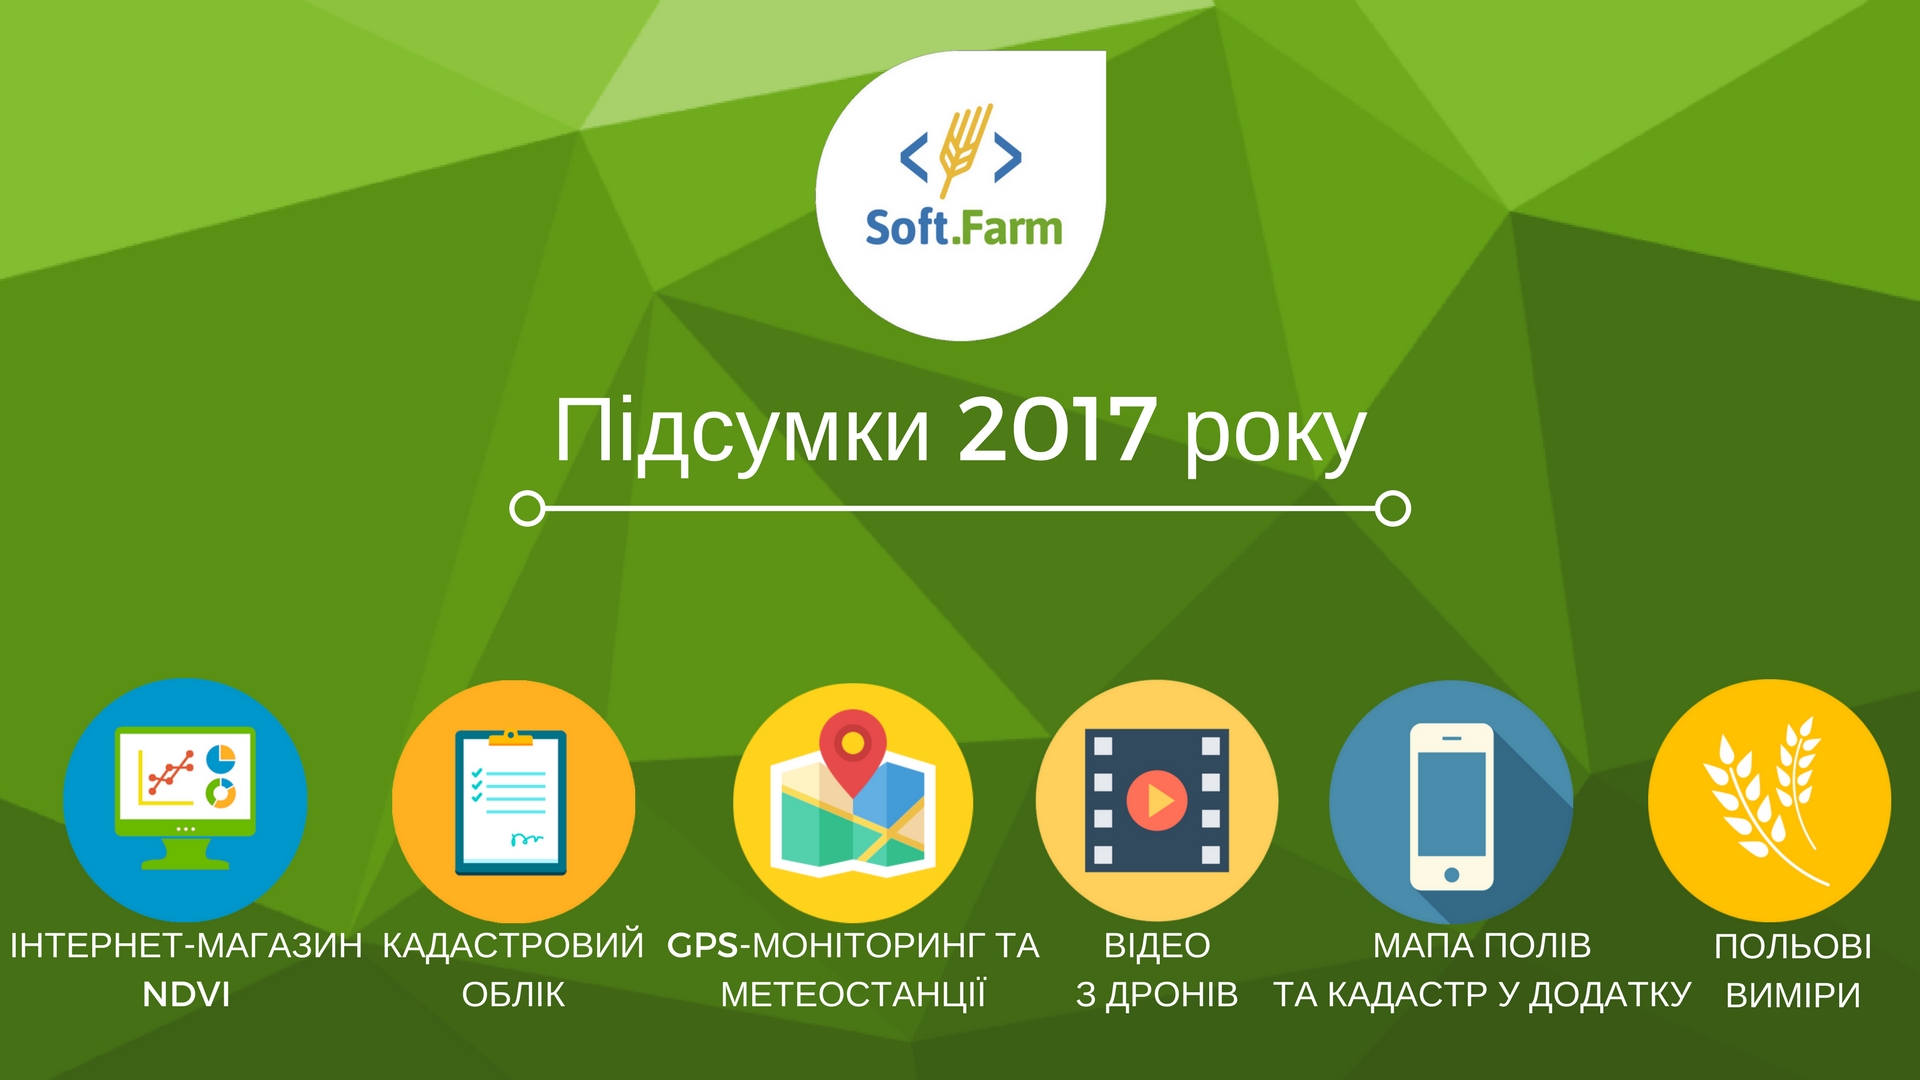 Results of 2017: what functions for plant growing was added to system Soft.Farm?